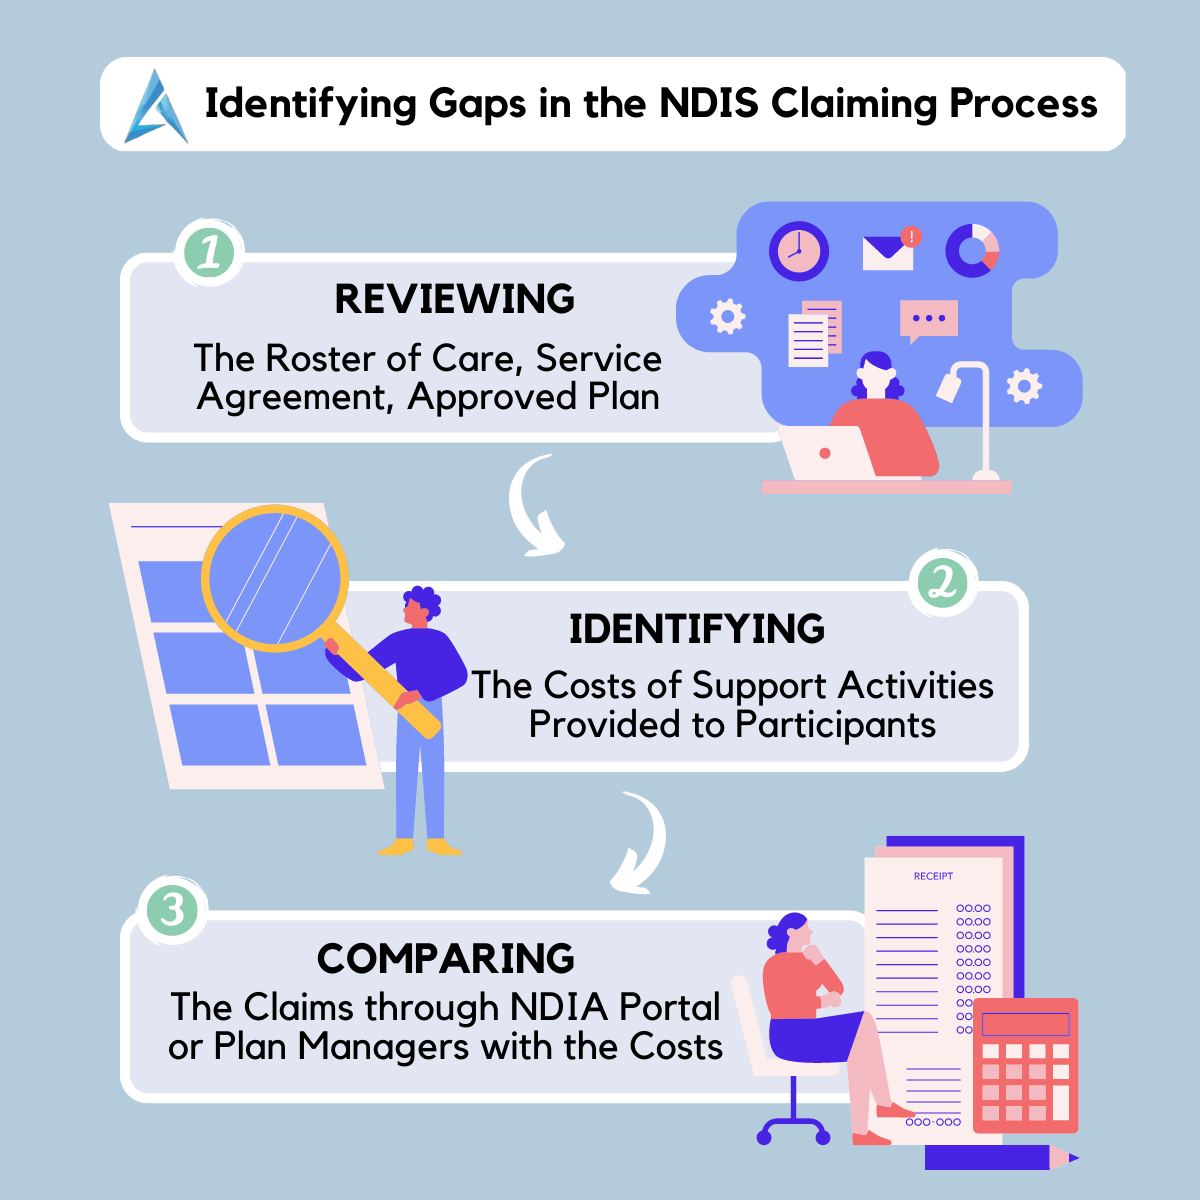 Identifying Gaps in the NDIS Claiming Process